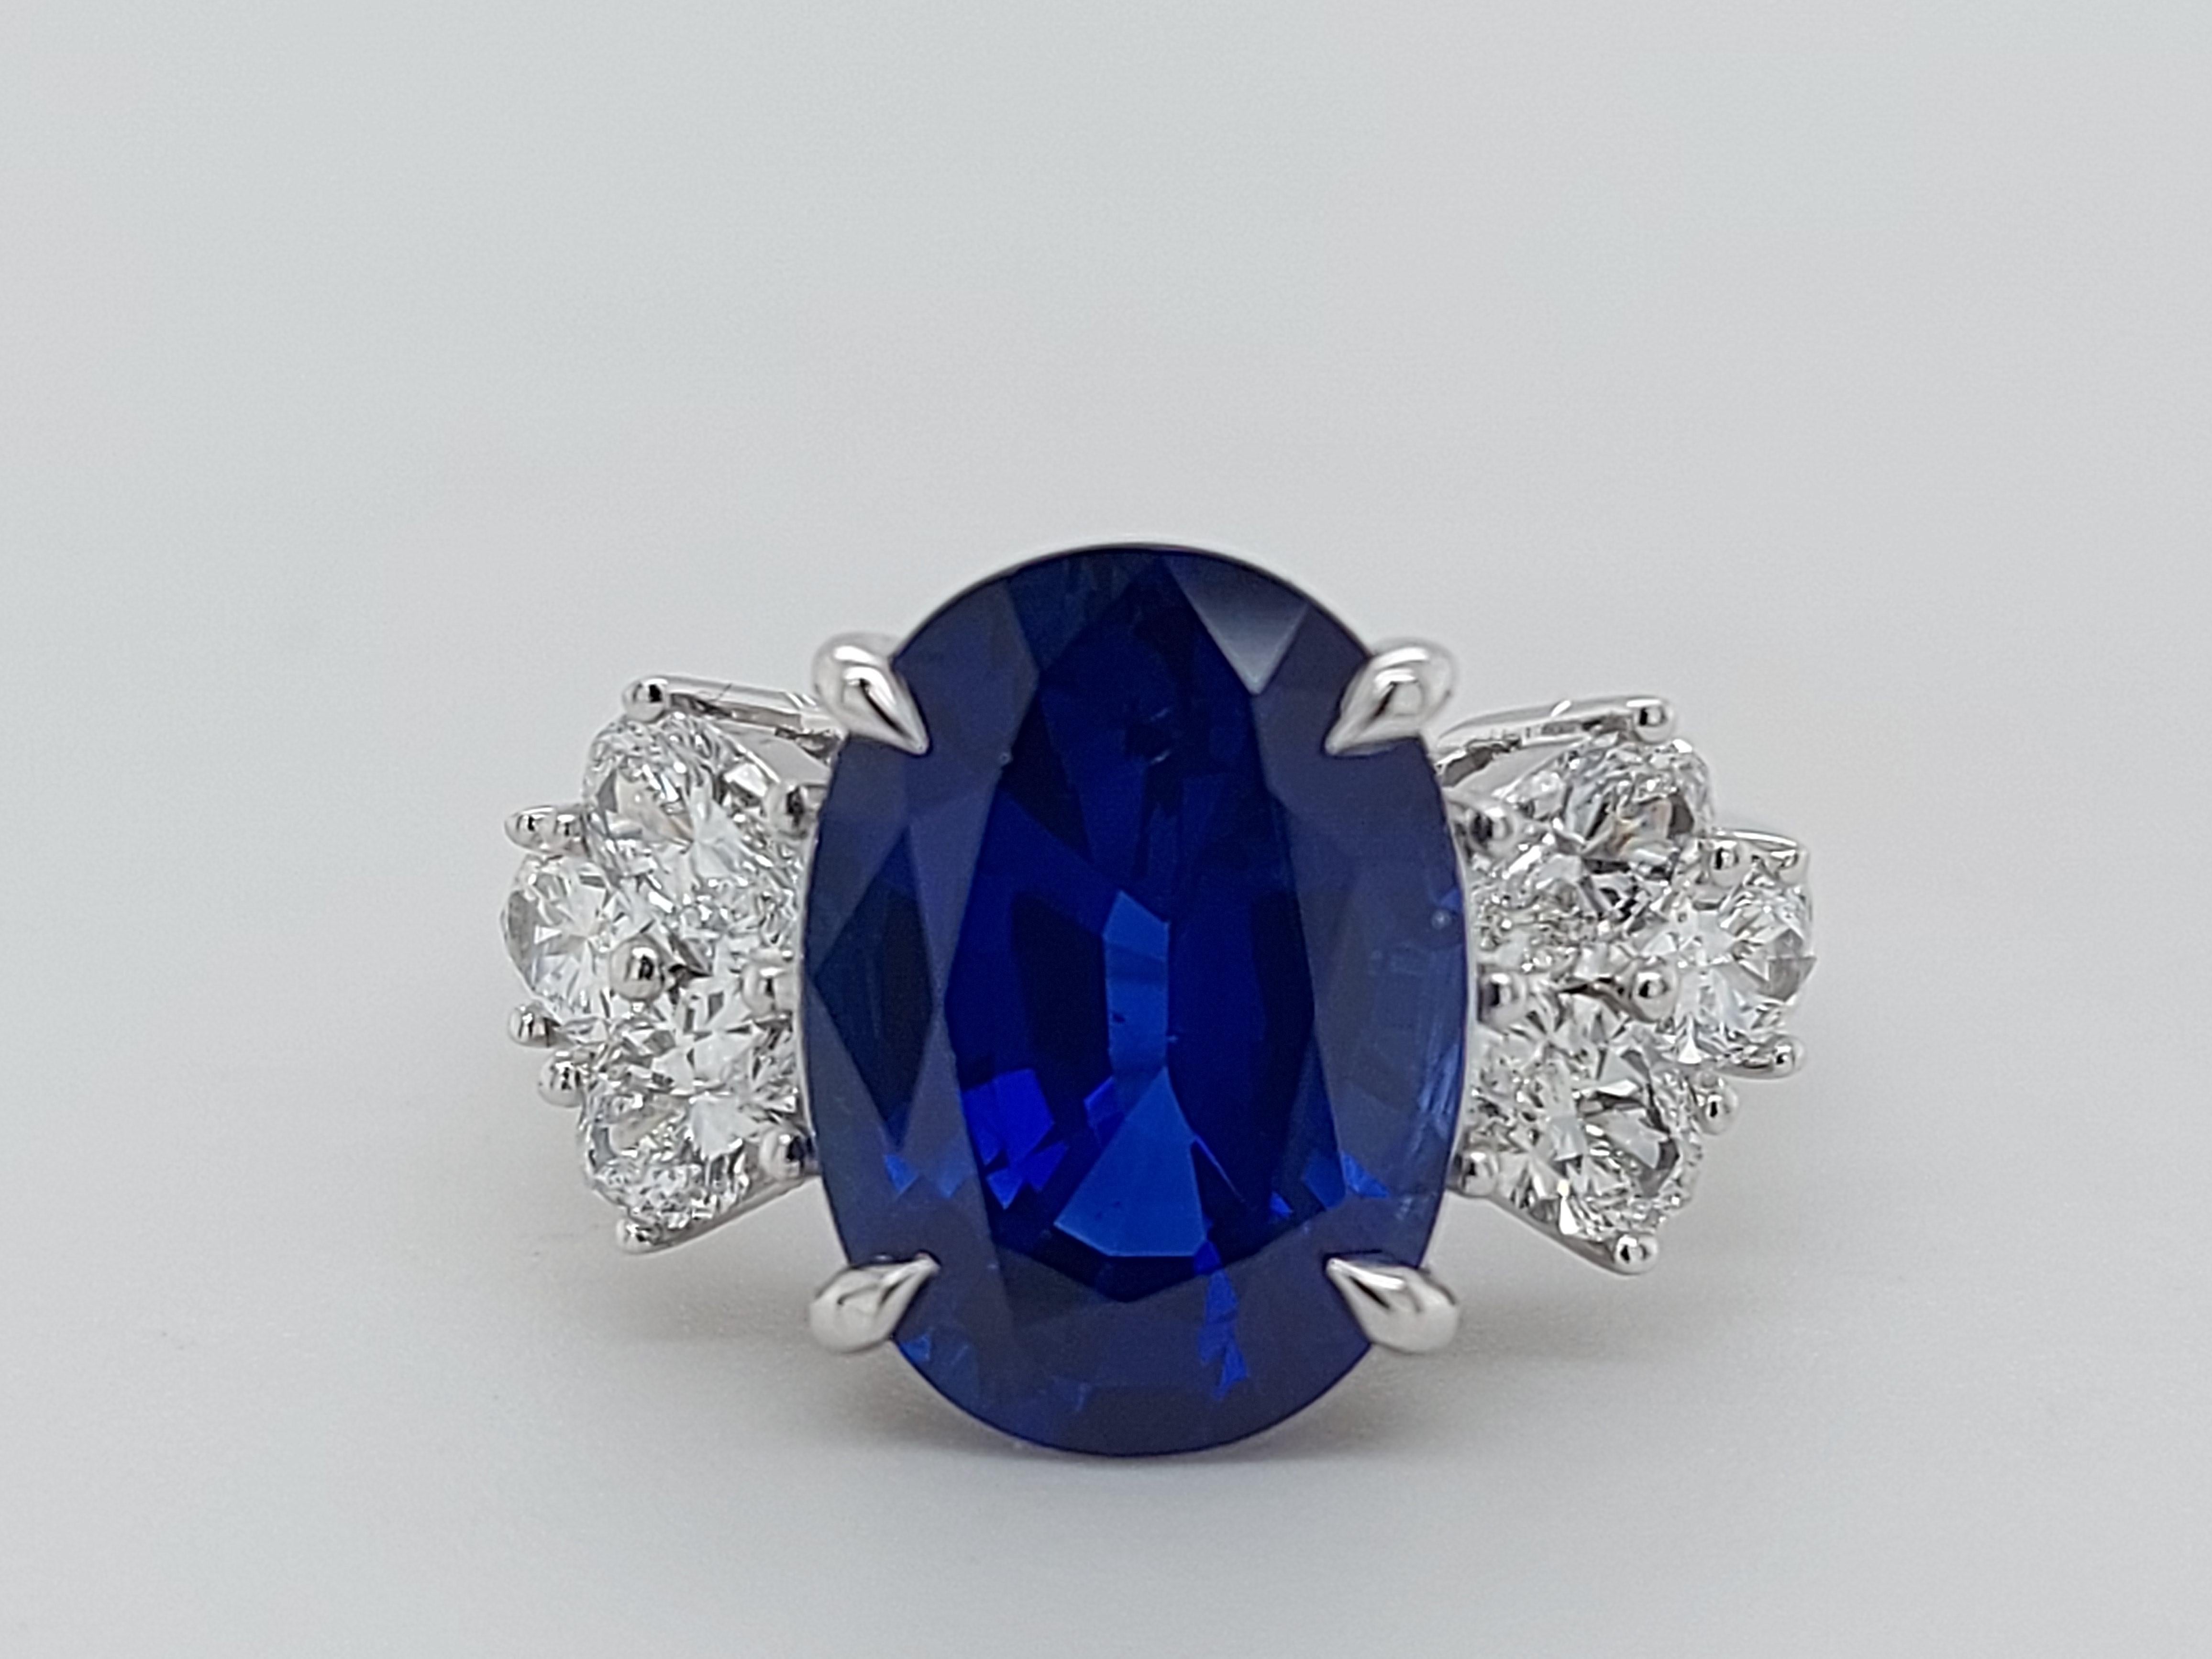 18 Karat White Gold Ring Set with a 7 Carat Sapphire and Diamonds 6